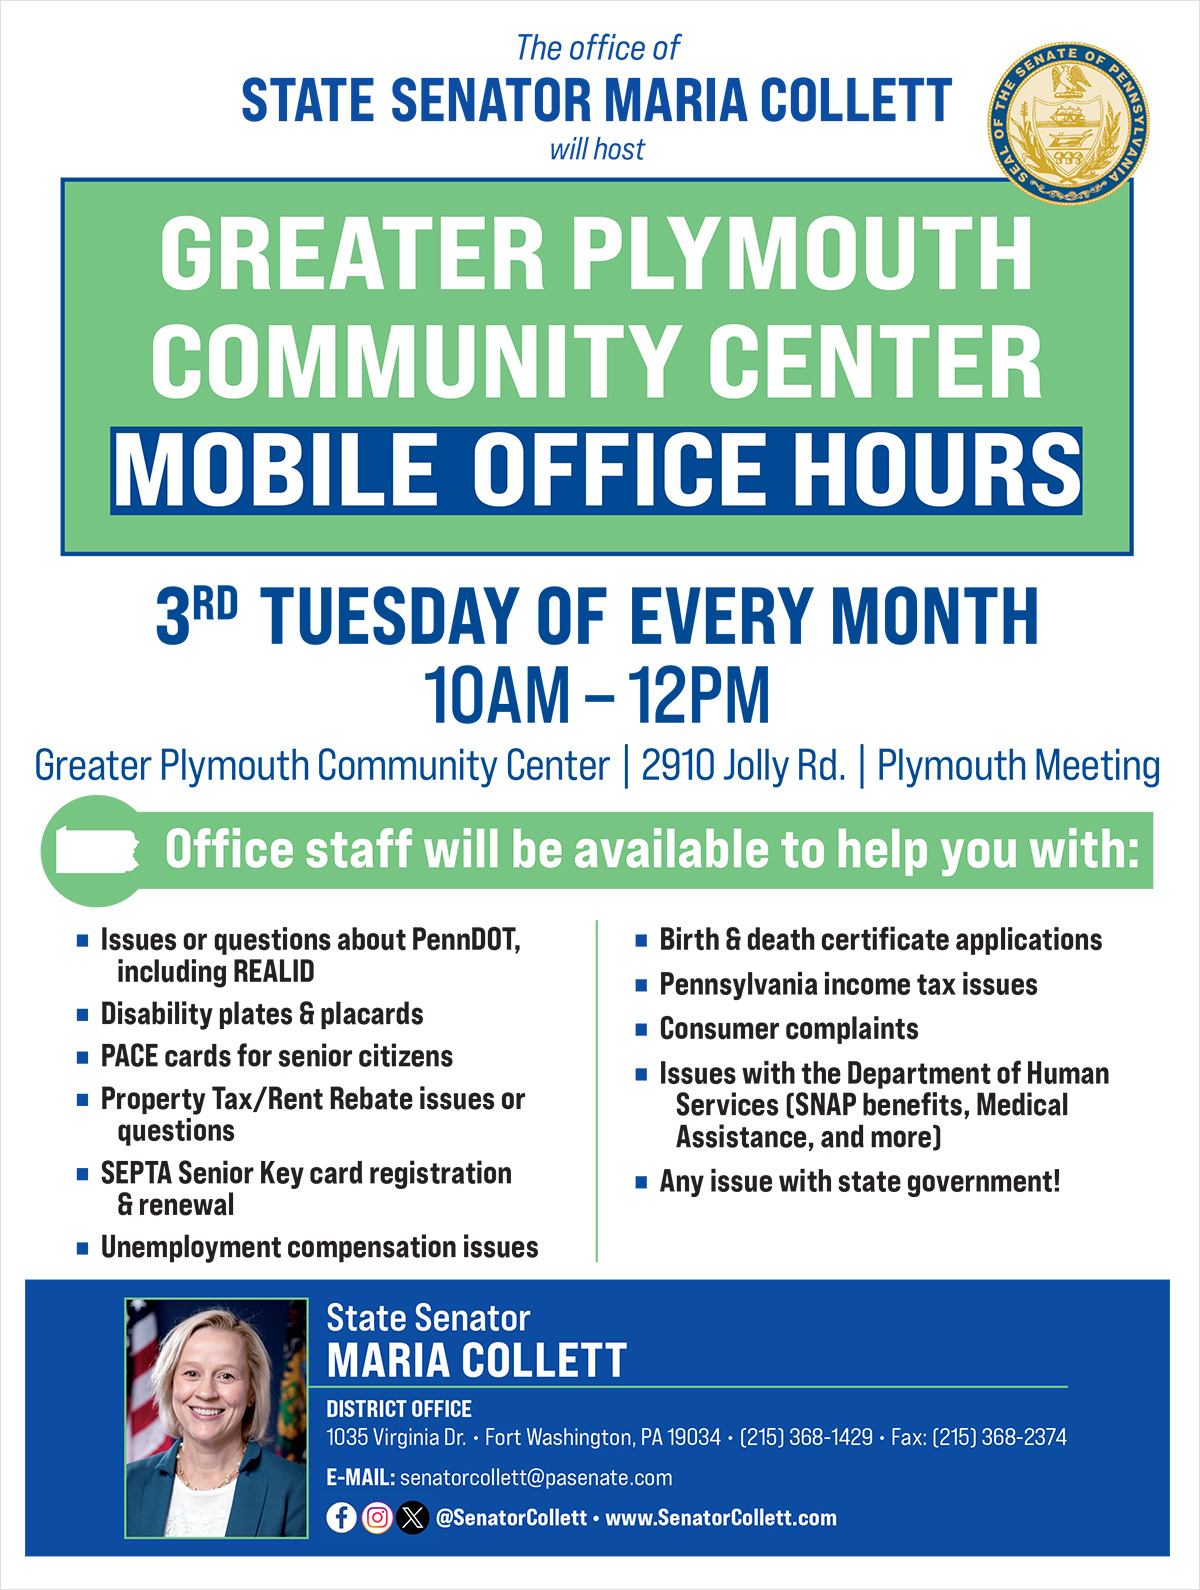 Greater Plymouth Community Center Mobile Office Hours